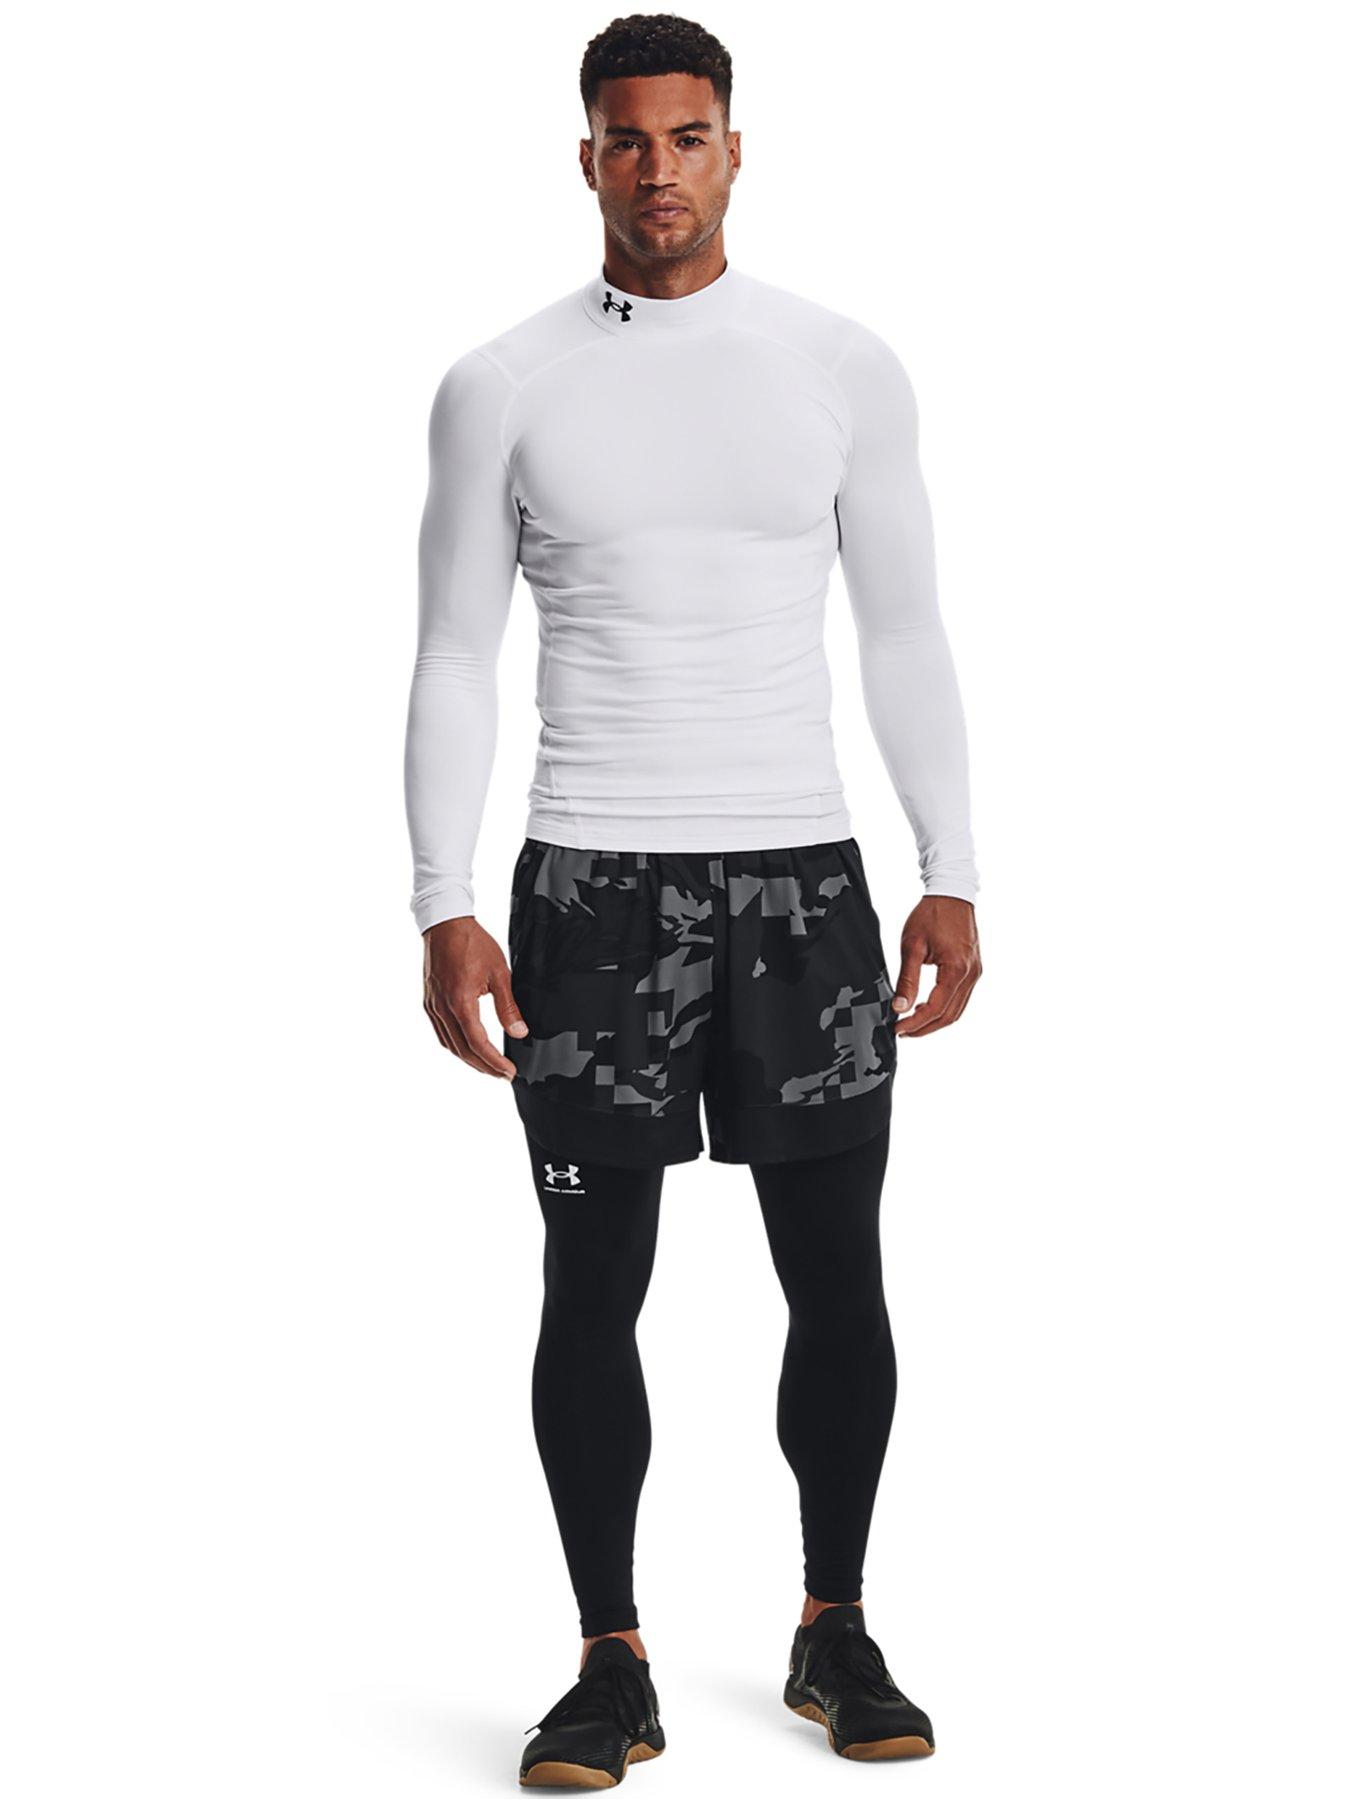 UNDER ARMOUR MEN'S HEATGEAR ARMOUR COMPRESSION SHORT SLEEVE TOP ROYAL –  National Sports